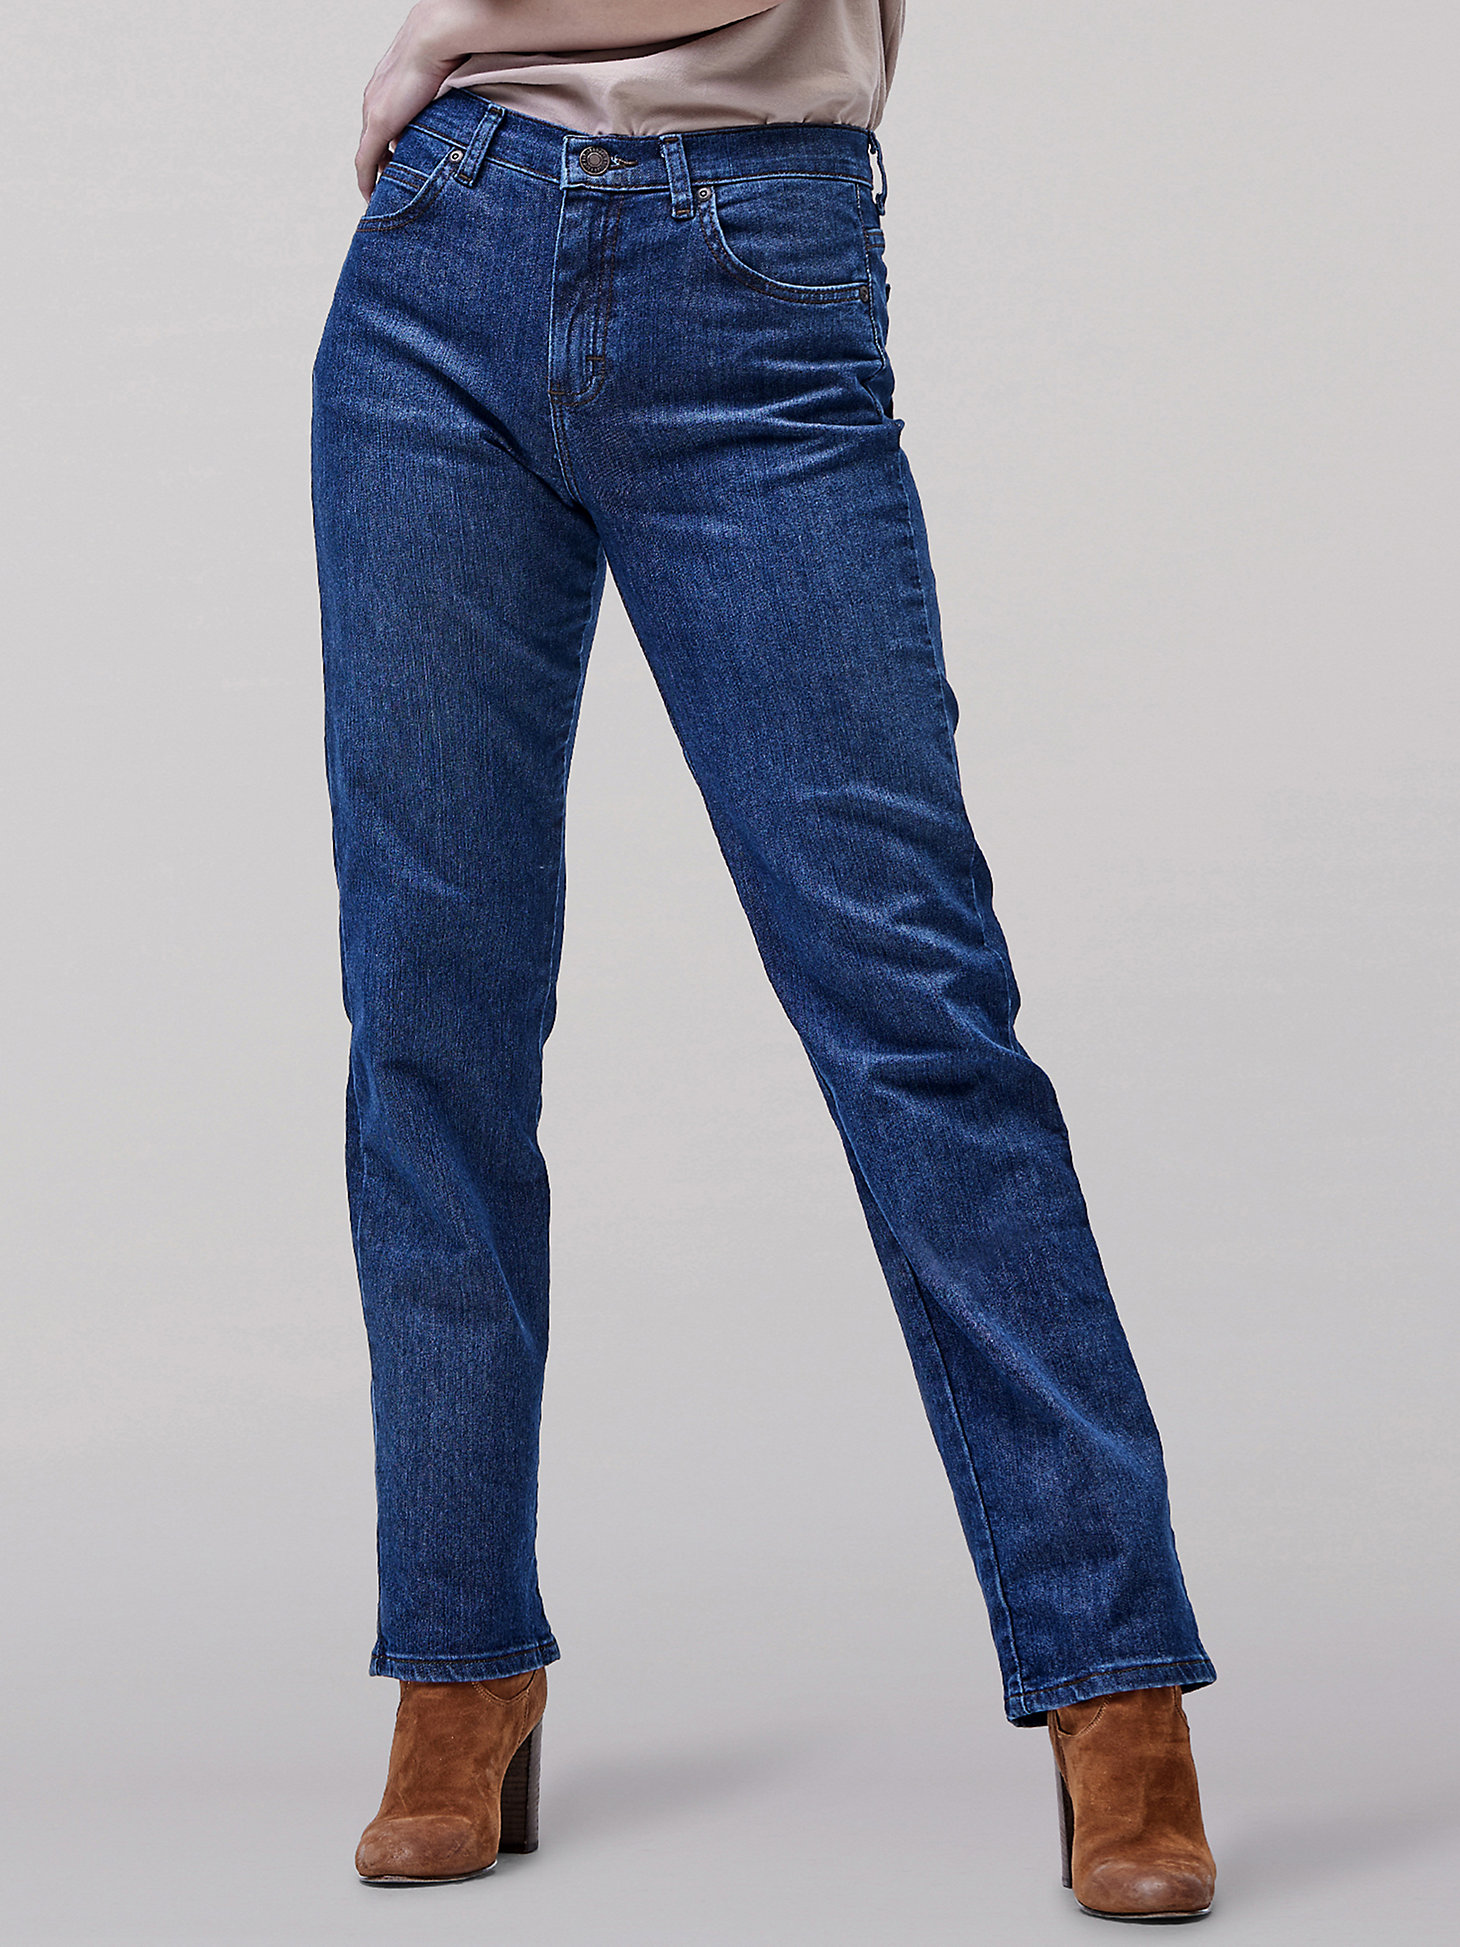 Women’s Original Relaxed Fit Straight Leg Jeans in Premium Rinse main view